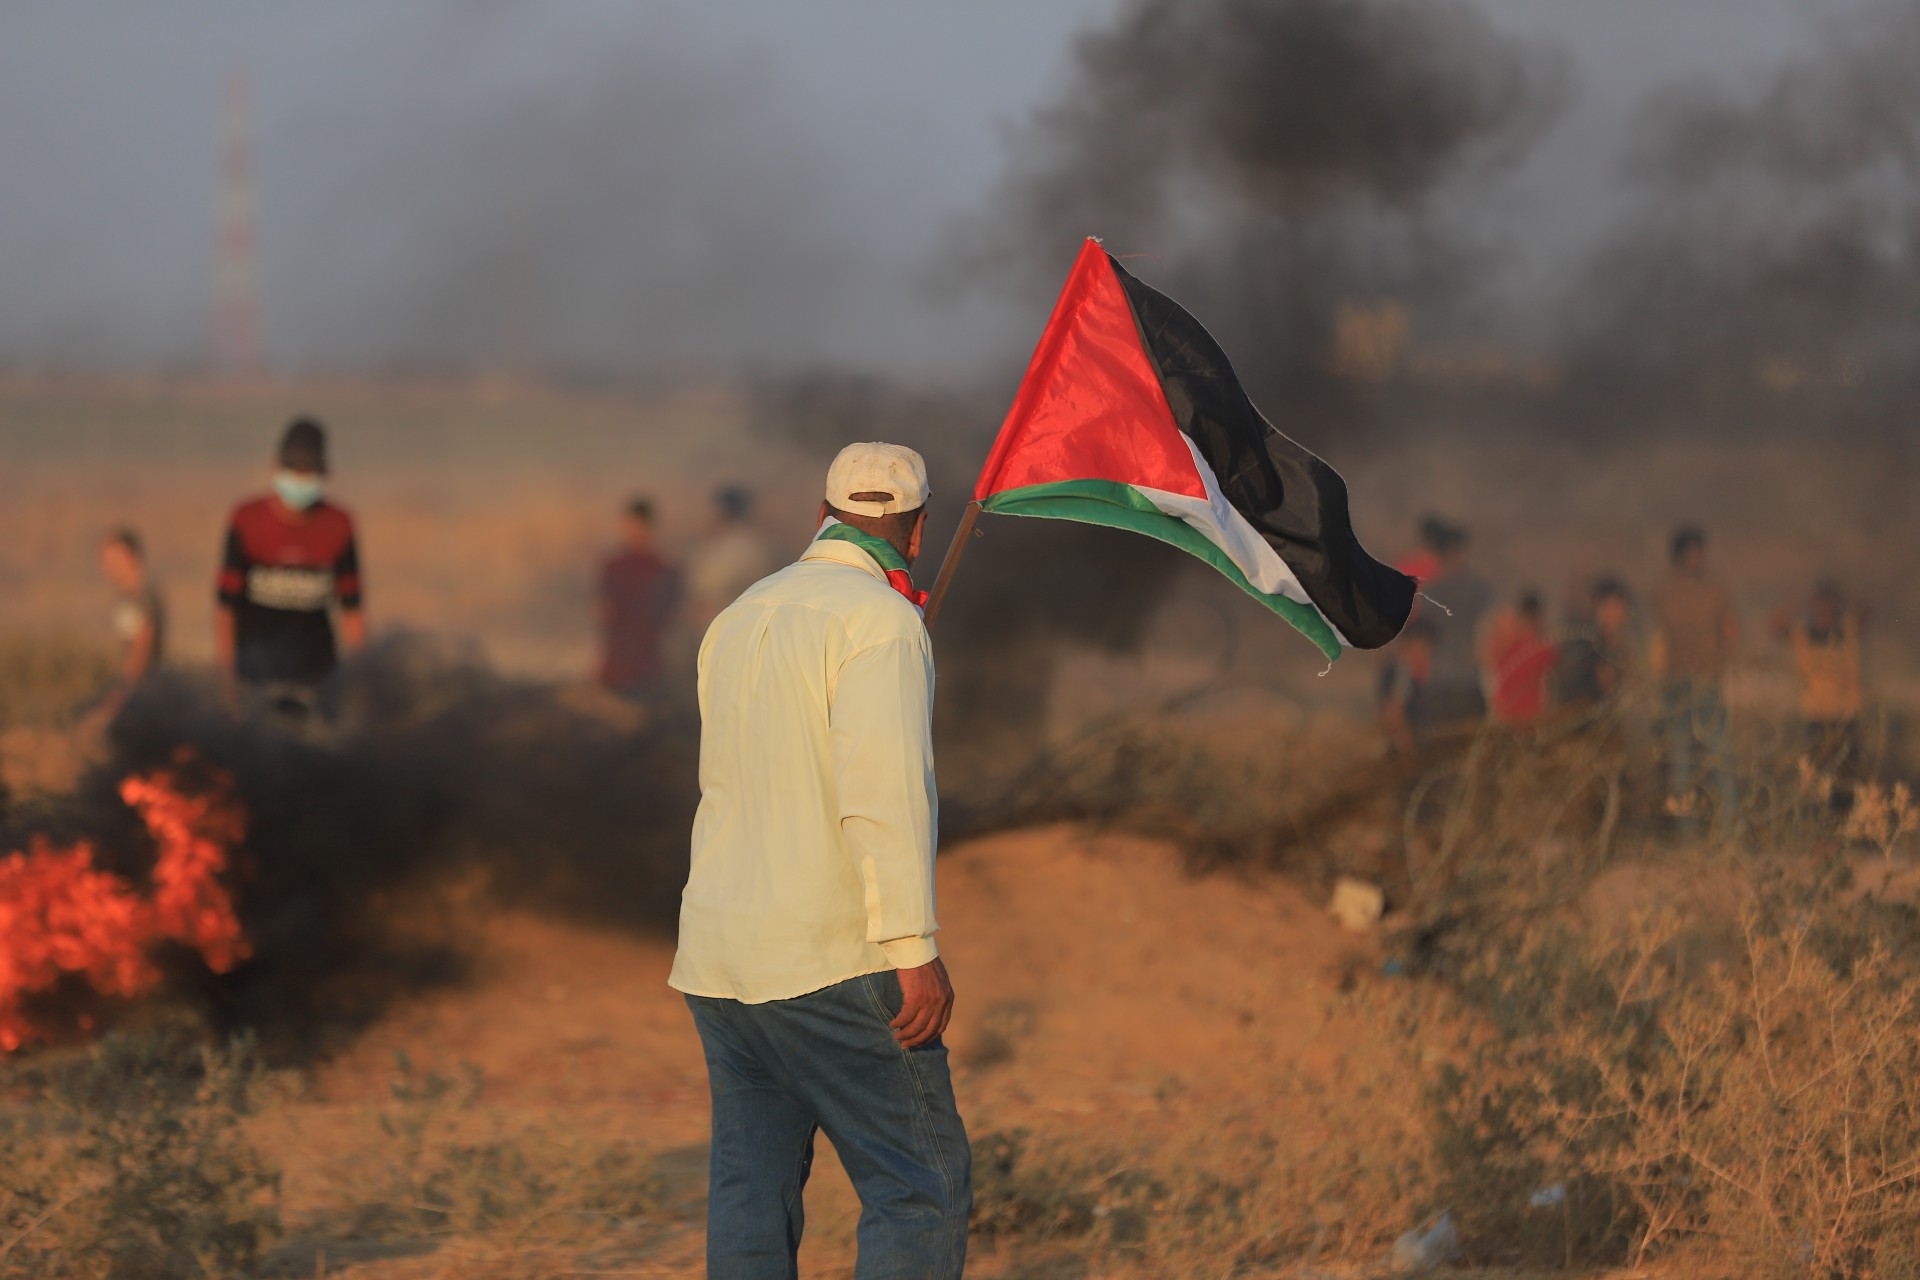 A Palestinian man attends a protest on the Gaza boundary on 25 August 2021 (MEE/Mohamed Naief)